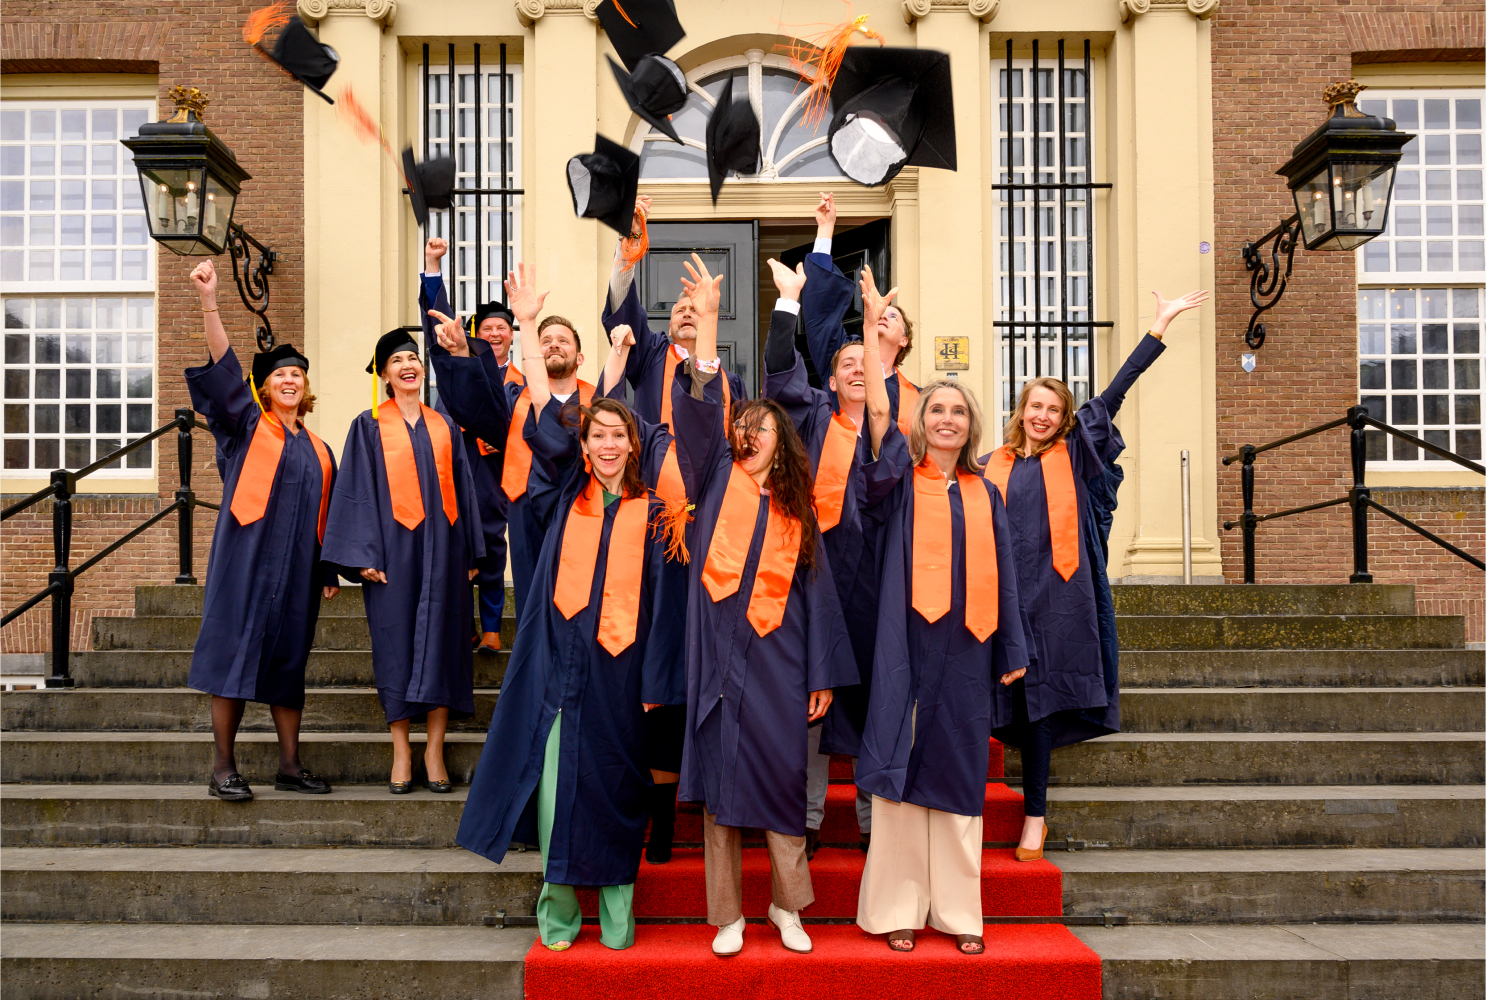 A sustainable step forward in healthcare: MBA9 students triumph in defence and graduation ceremony